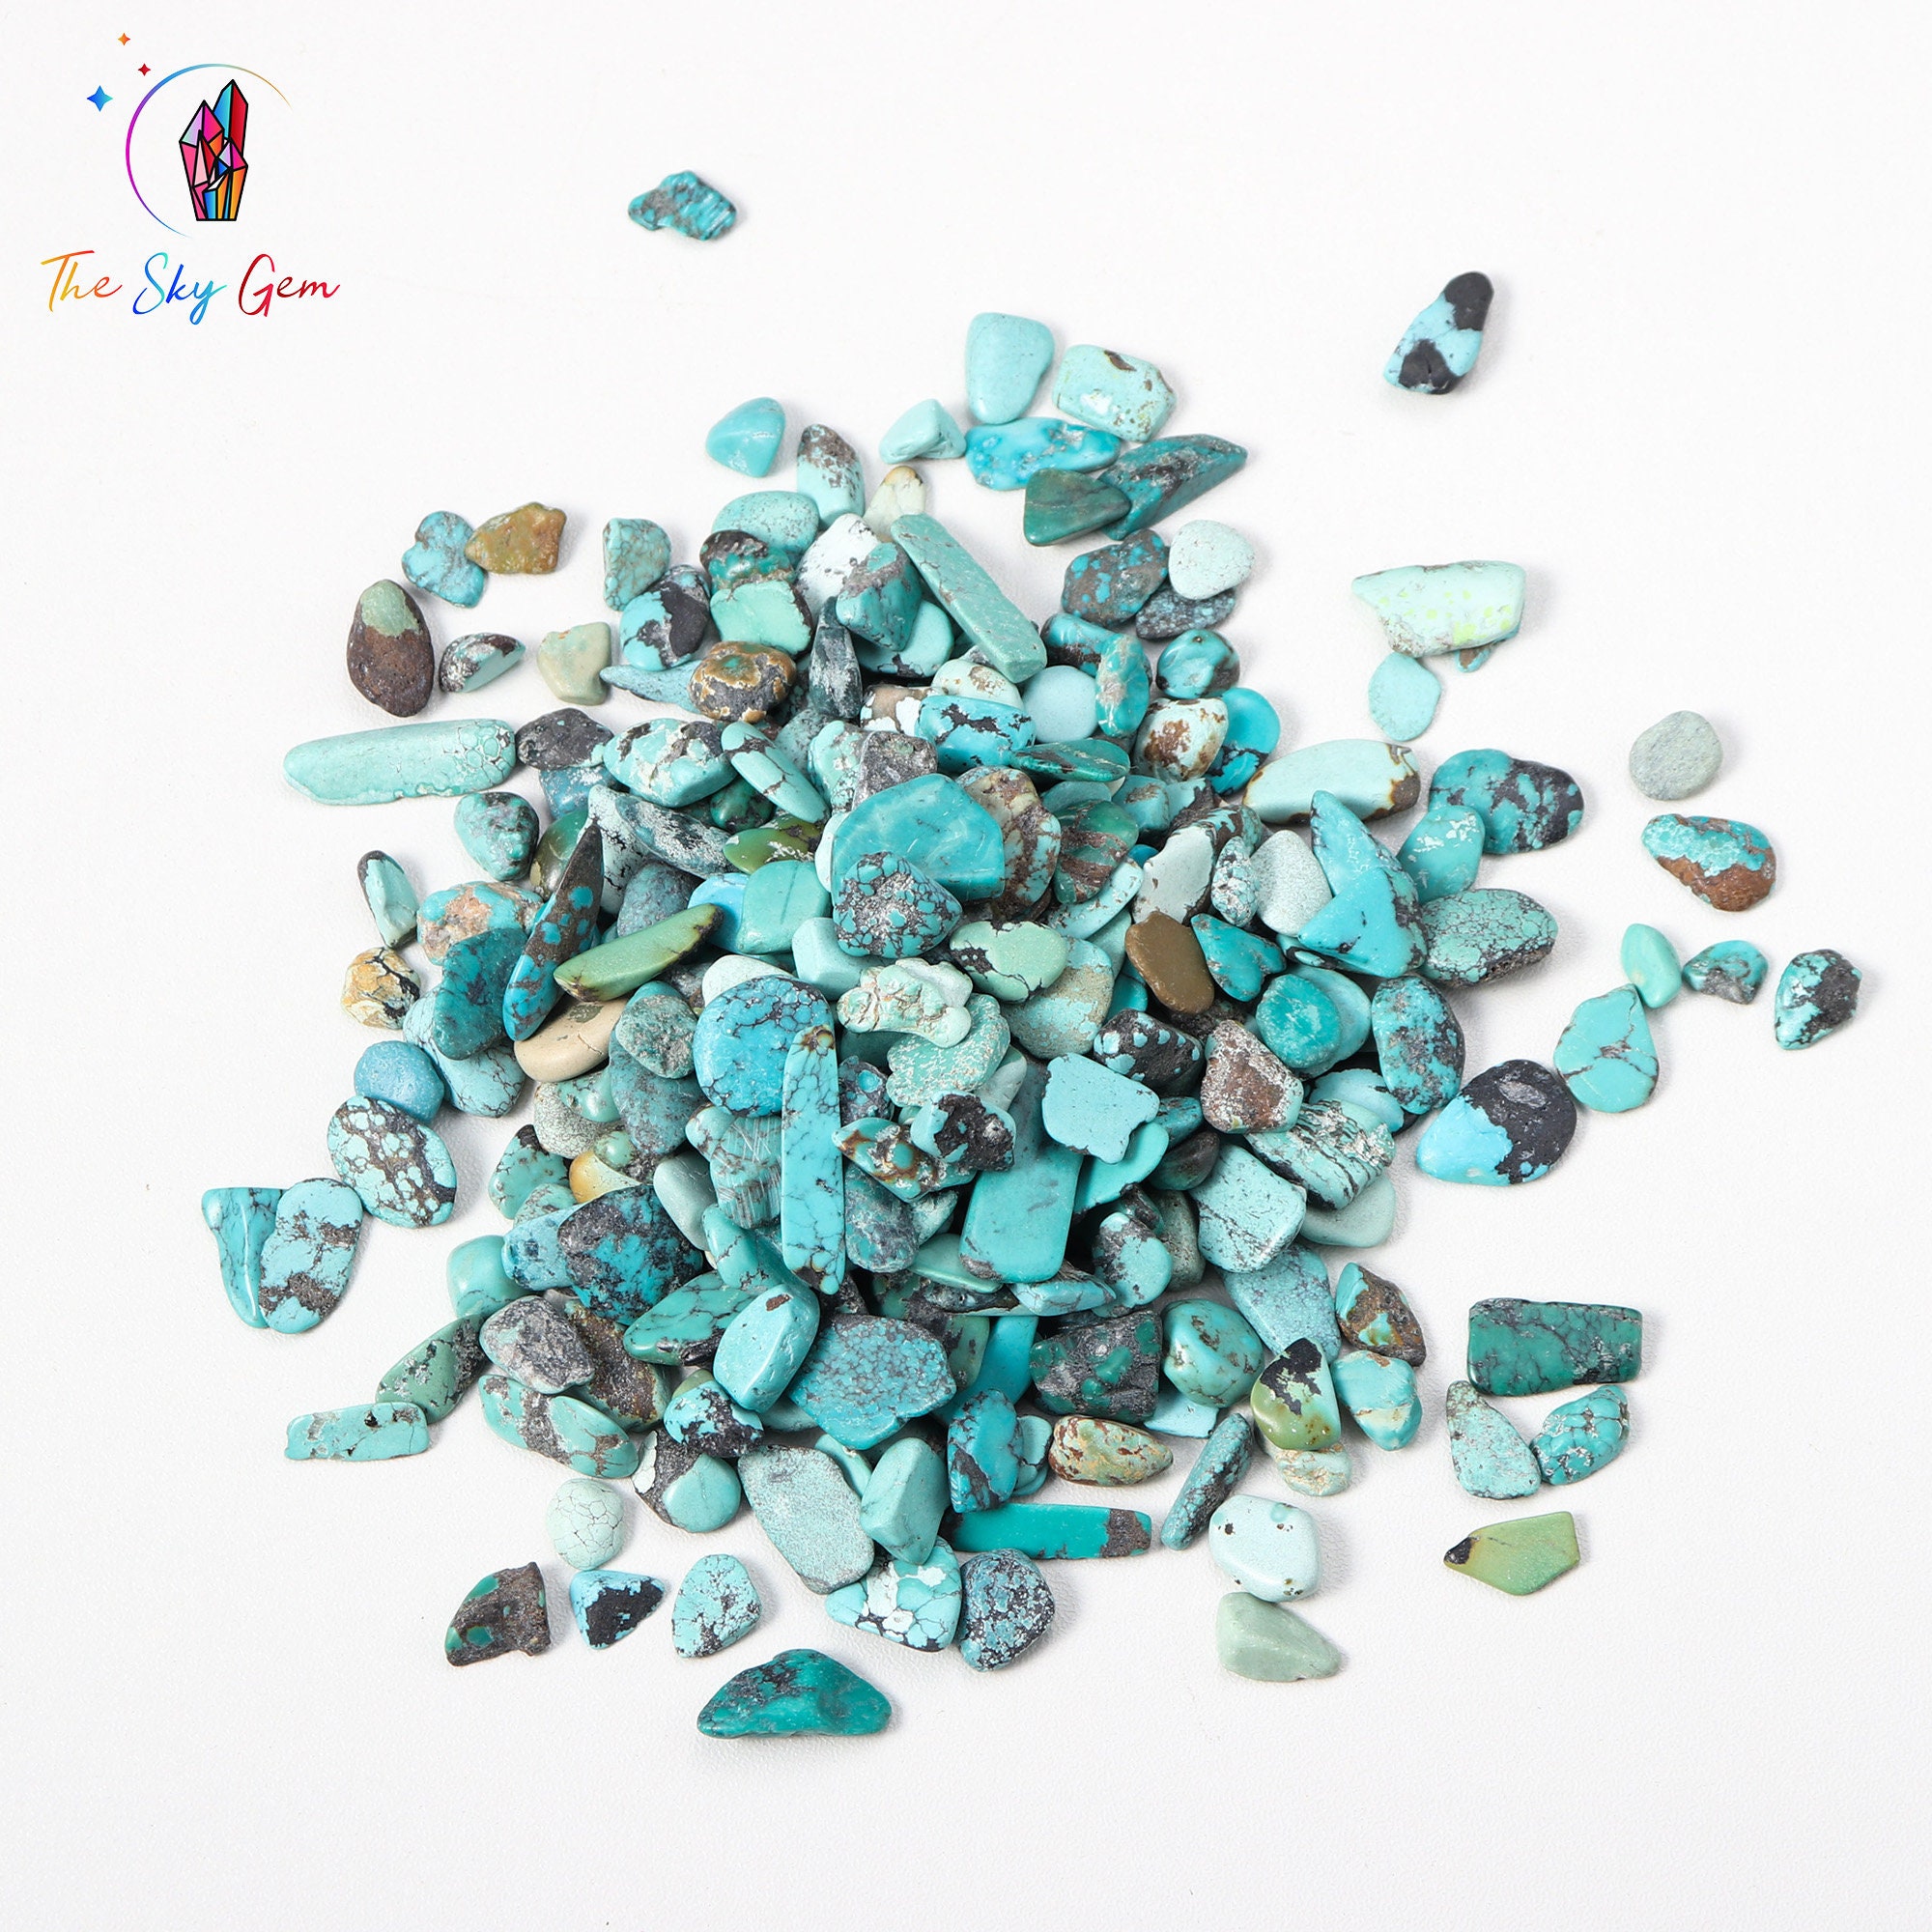 3-5mm Super Tiny Sea Glass Chips Green Turquoise Jewelry Making Supplies  Mosaic Miniature Glass Crafts Glass Micro Decorating Glass Mini 